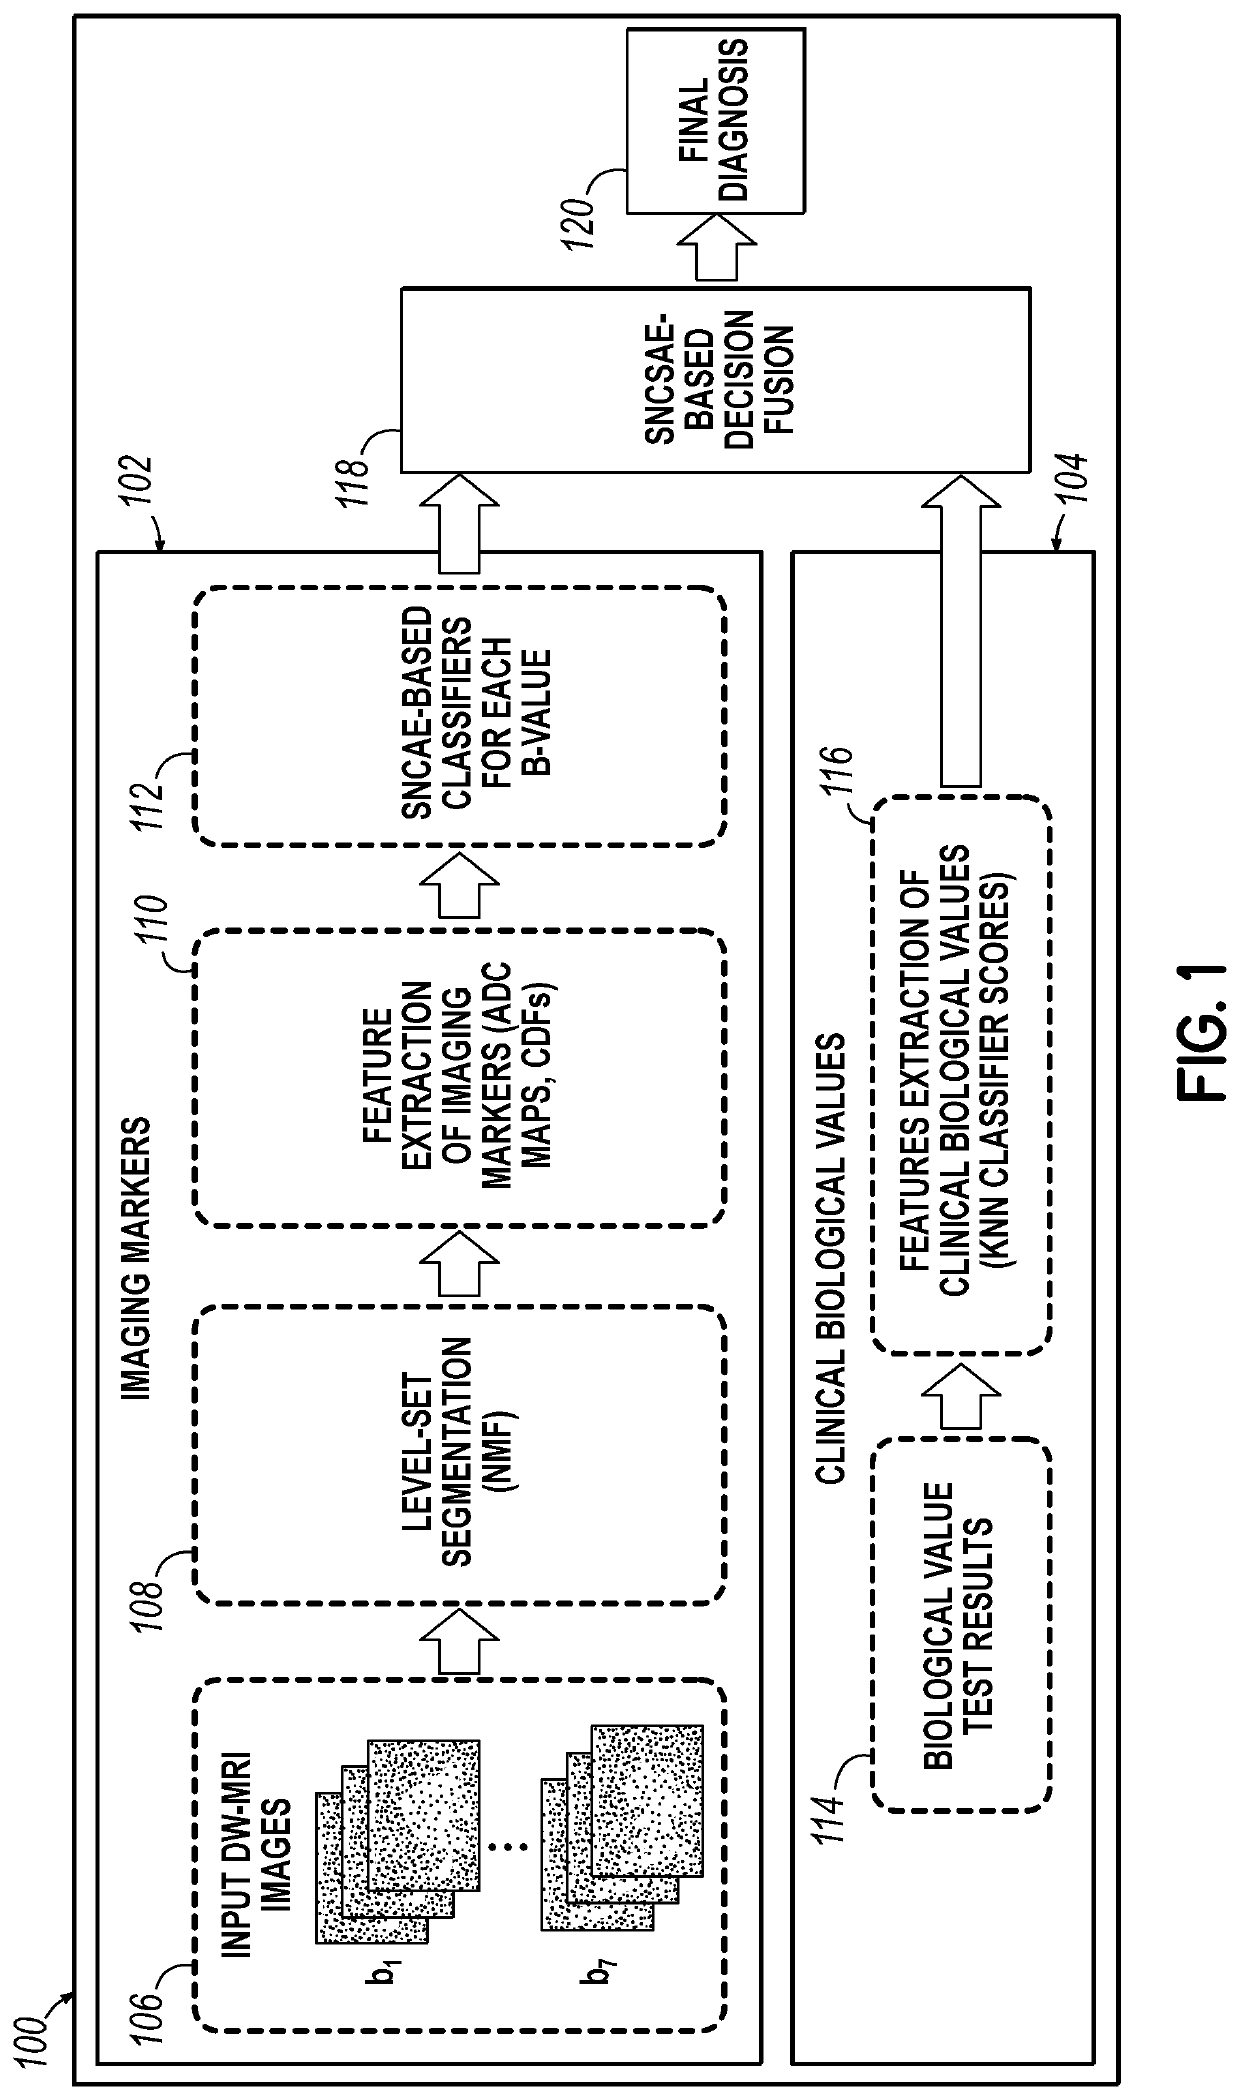 Computer-aided diagnostic system for early diagnosis of prostate cancer